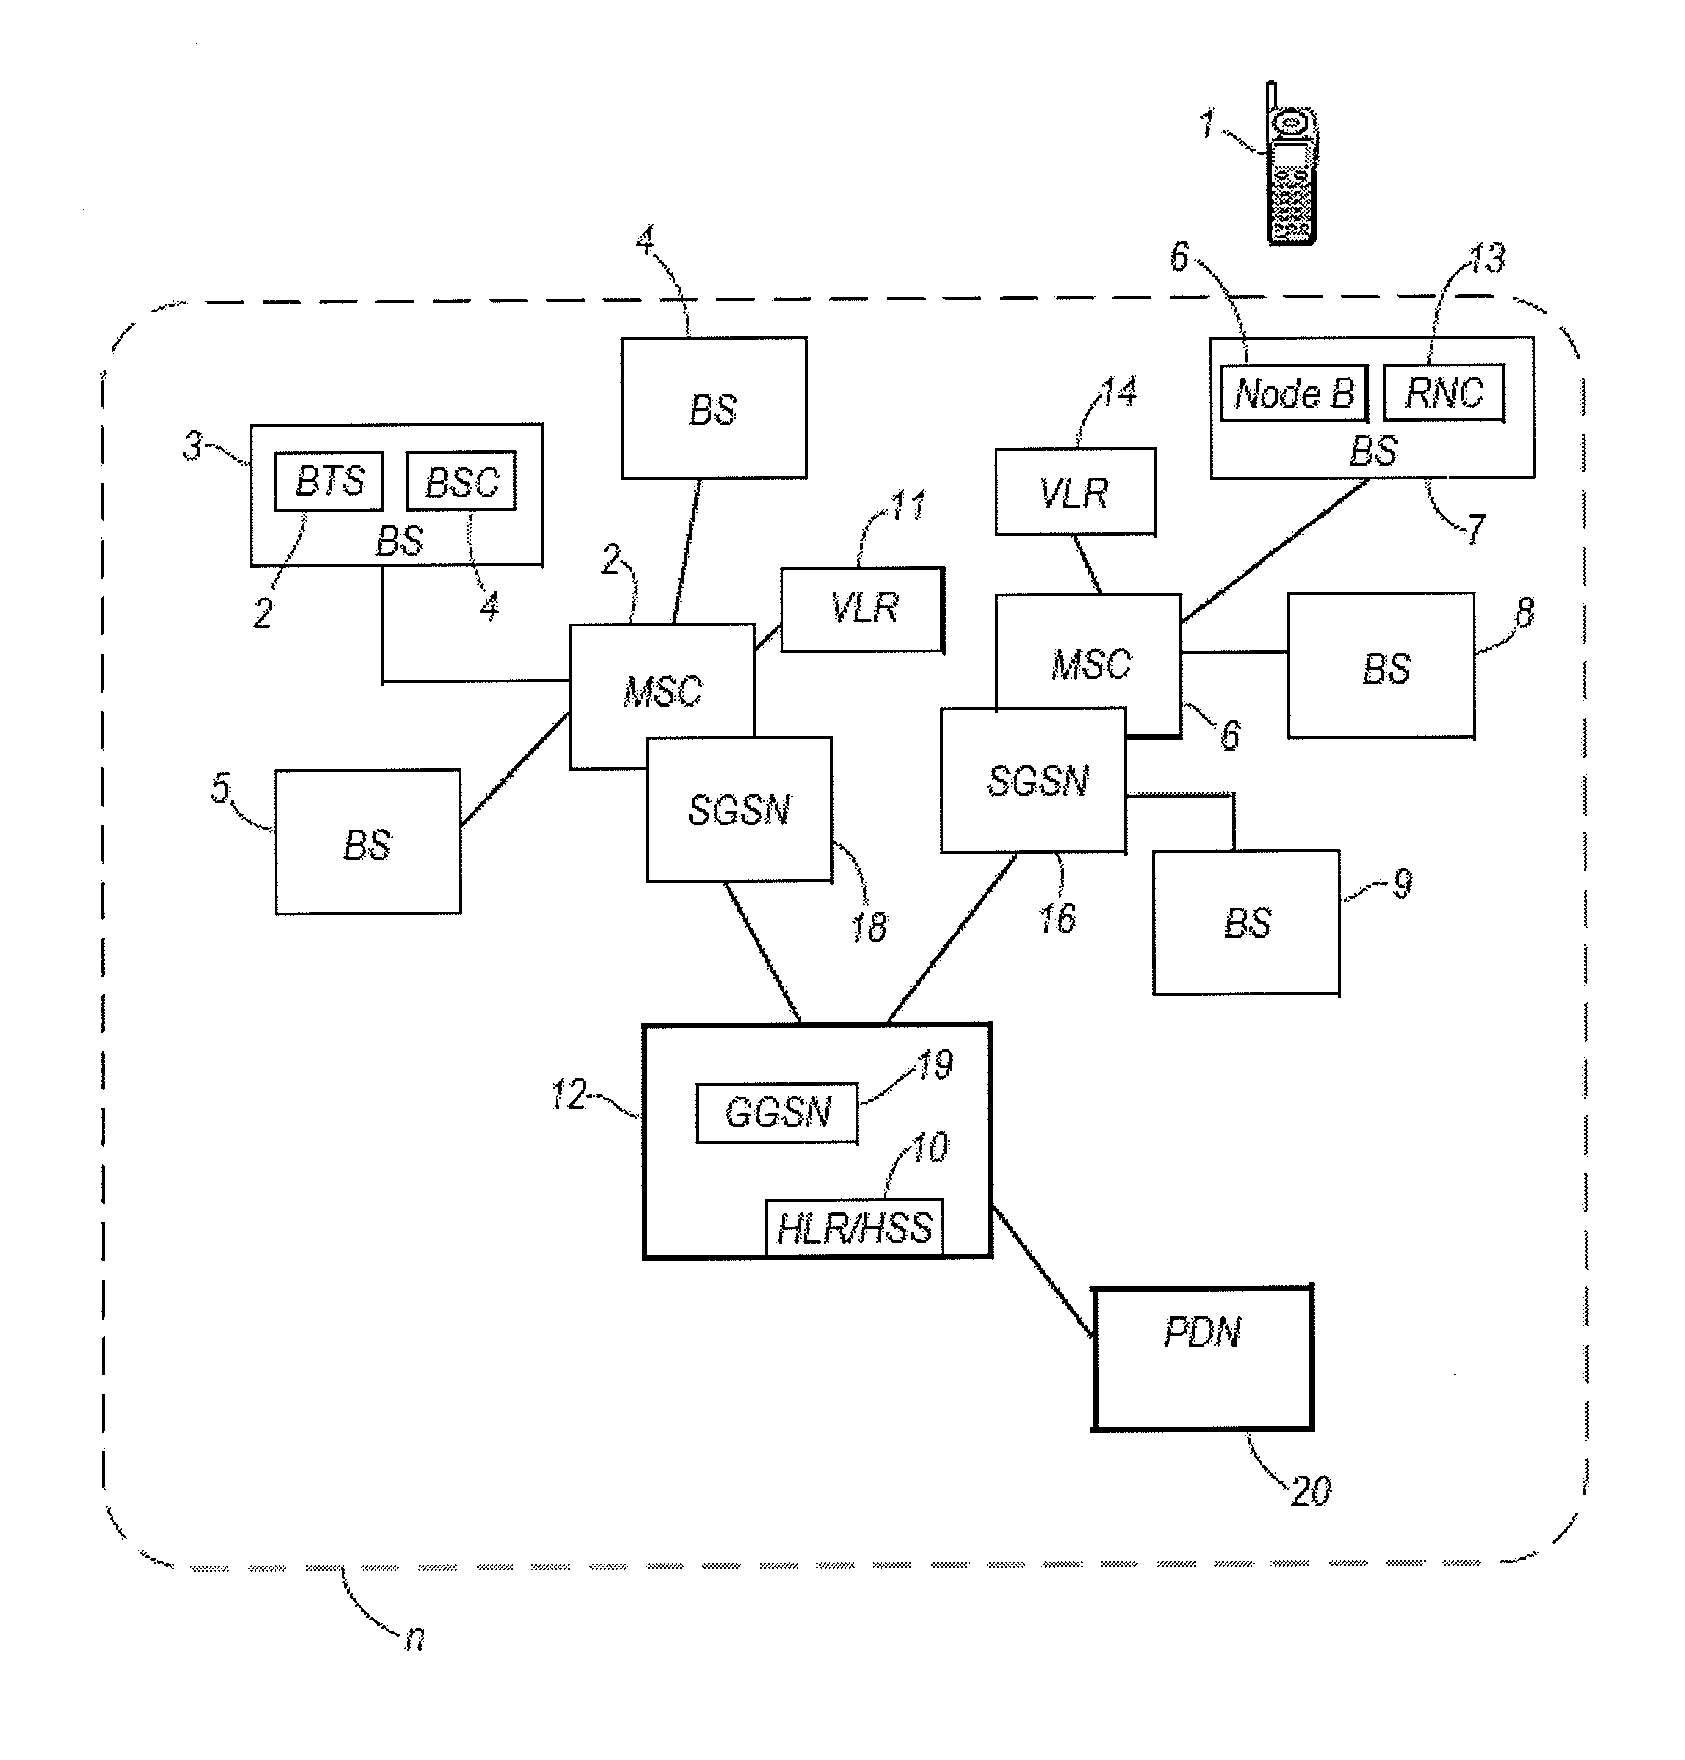 Radio coverage mapping for telecommunications network